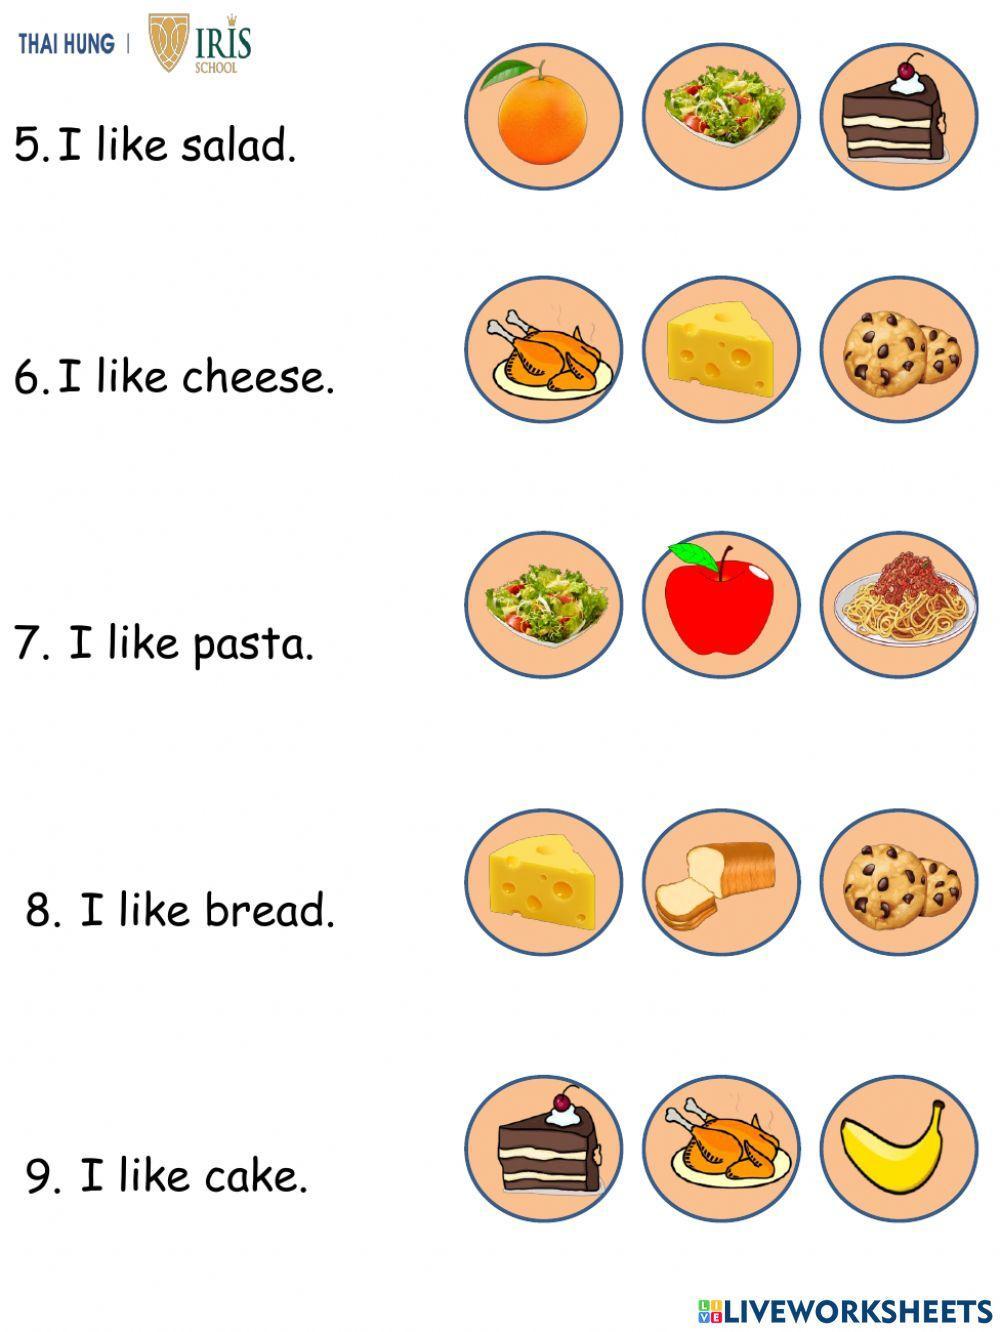 Worksheet about Foods for kids